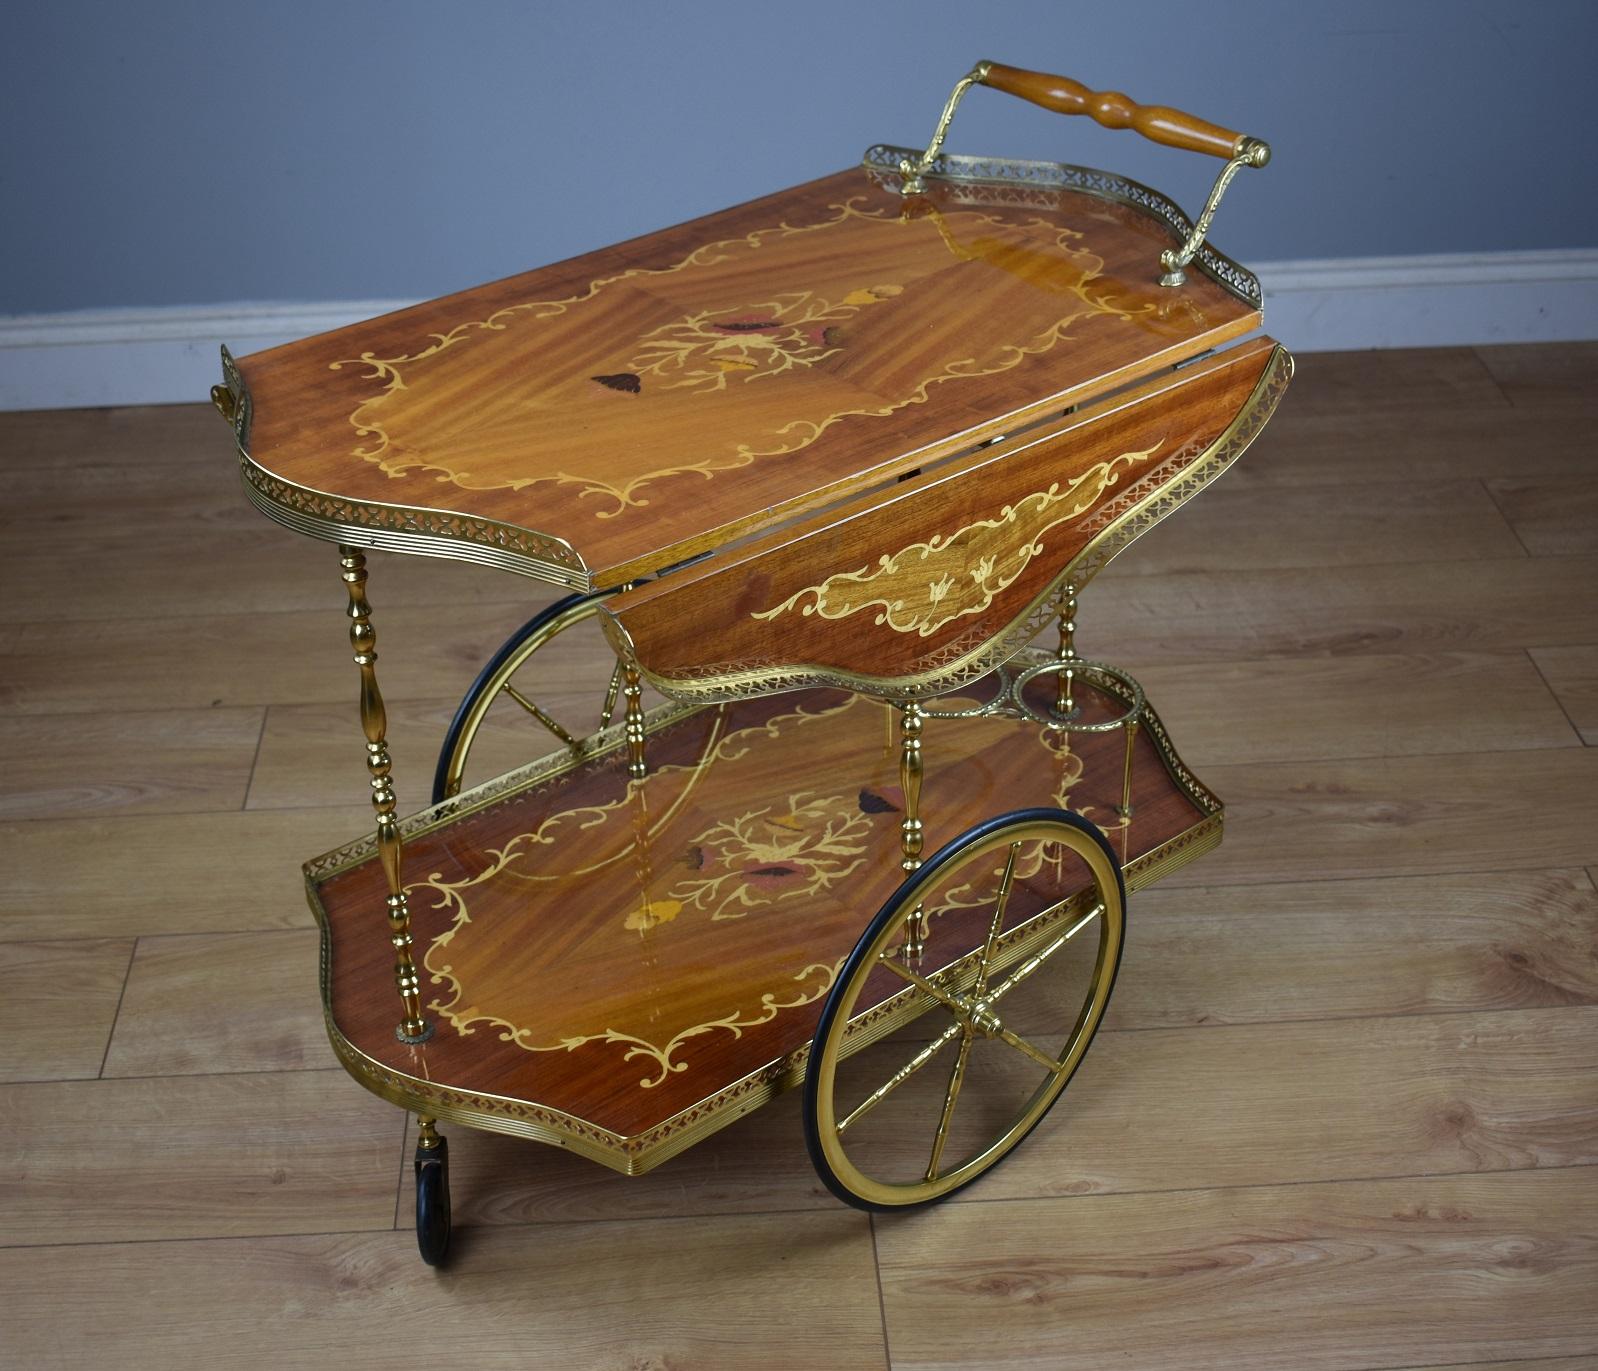 For sale is a good quality walnut and marquetry drinks trolley by H&L Epstein. The trolley has shaped drop leaves, profusely decorated with marquetry inlay above an under tier, fitted for bottles and decorated with further marquetry inlay. The